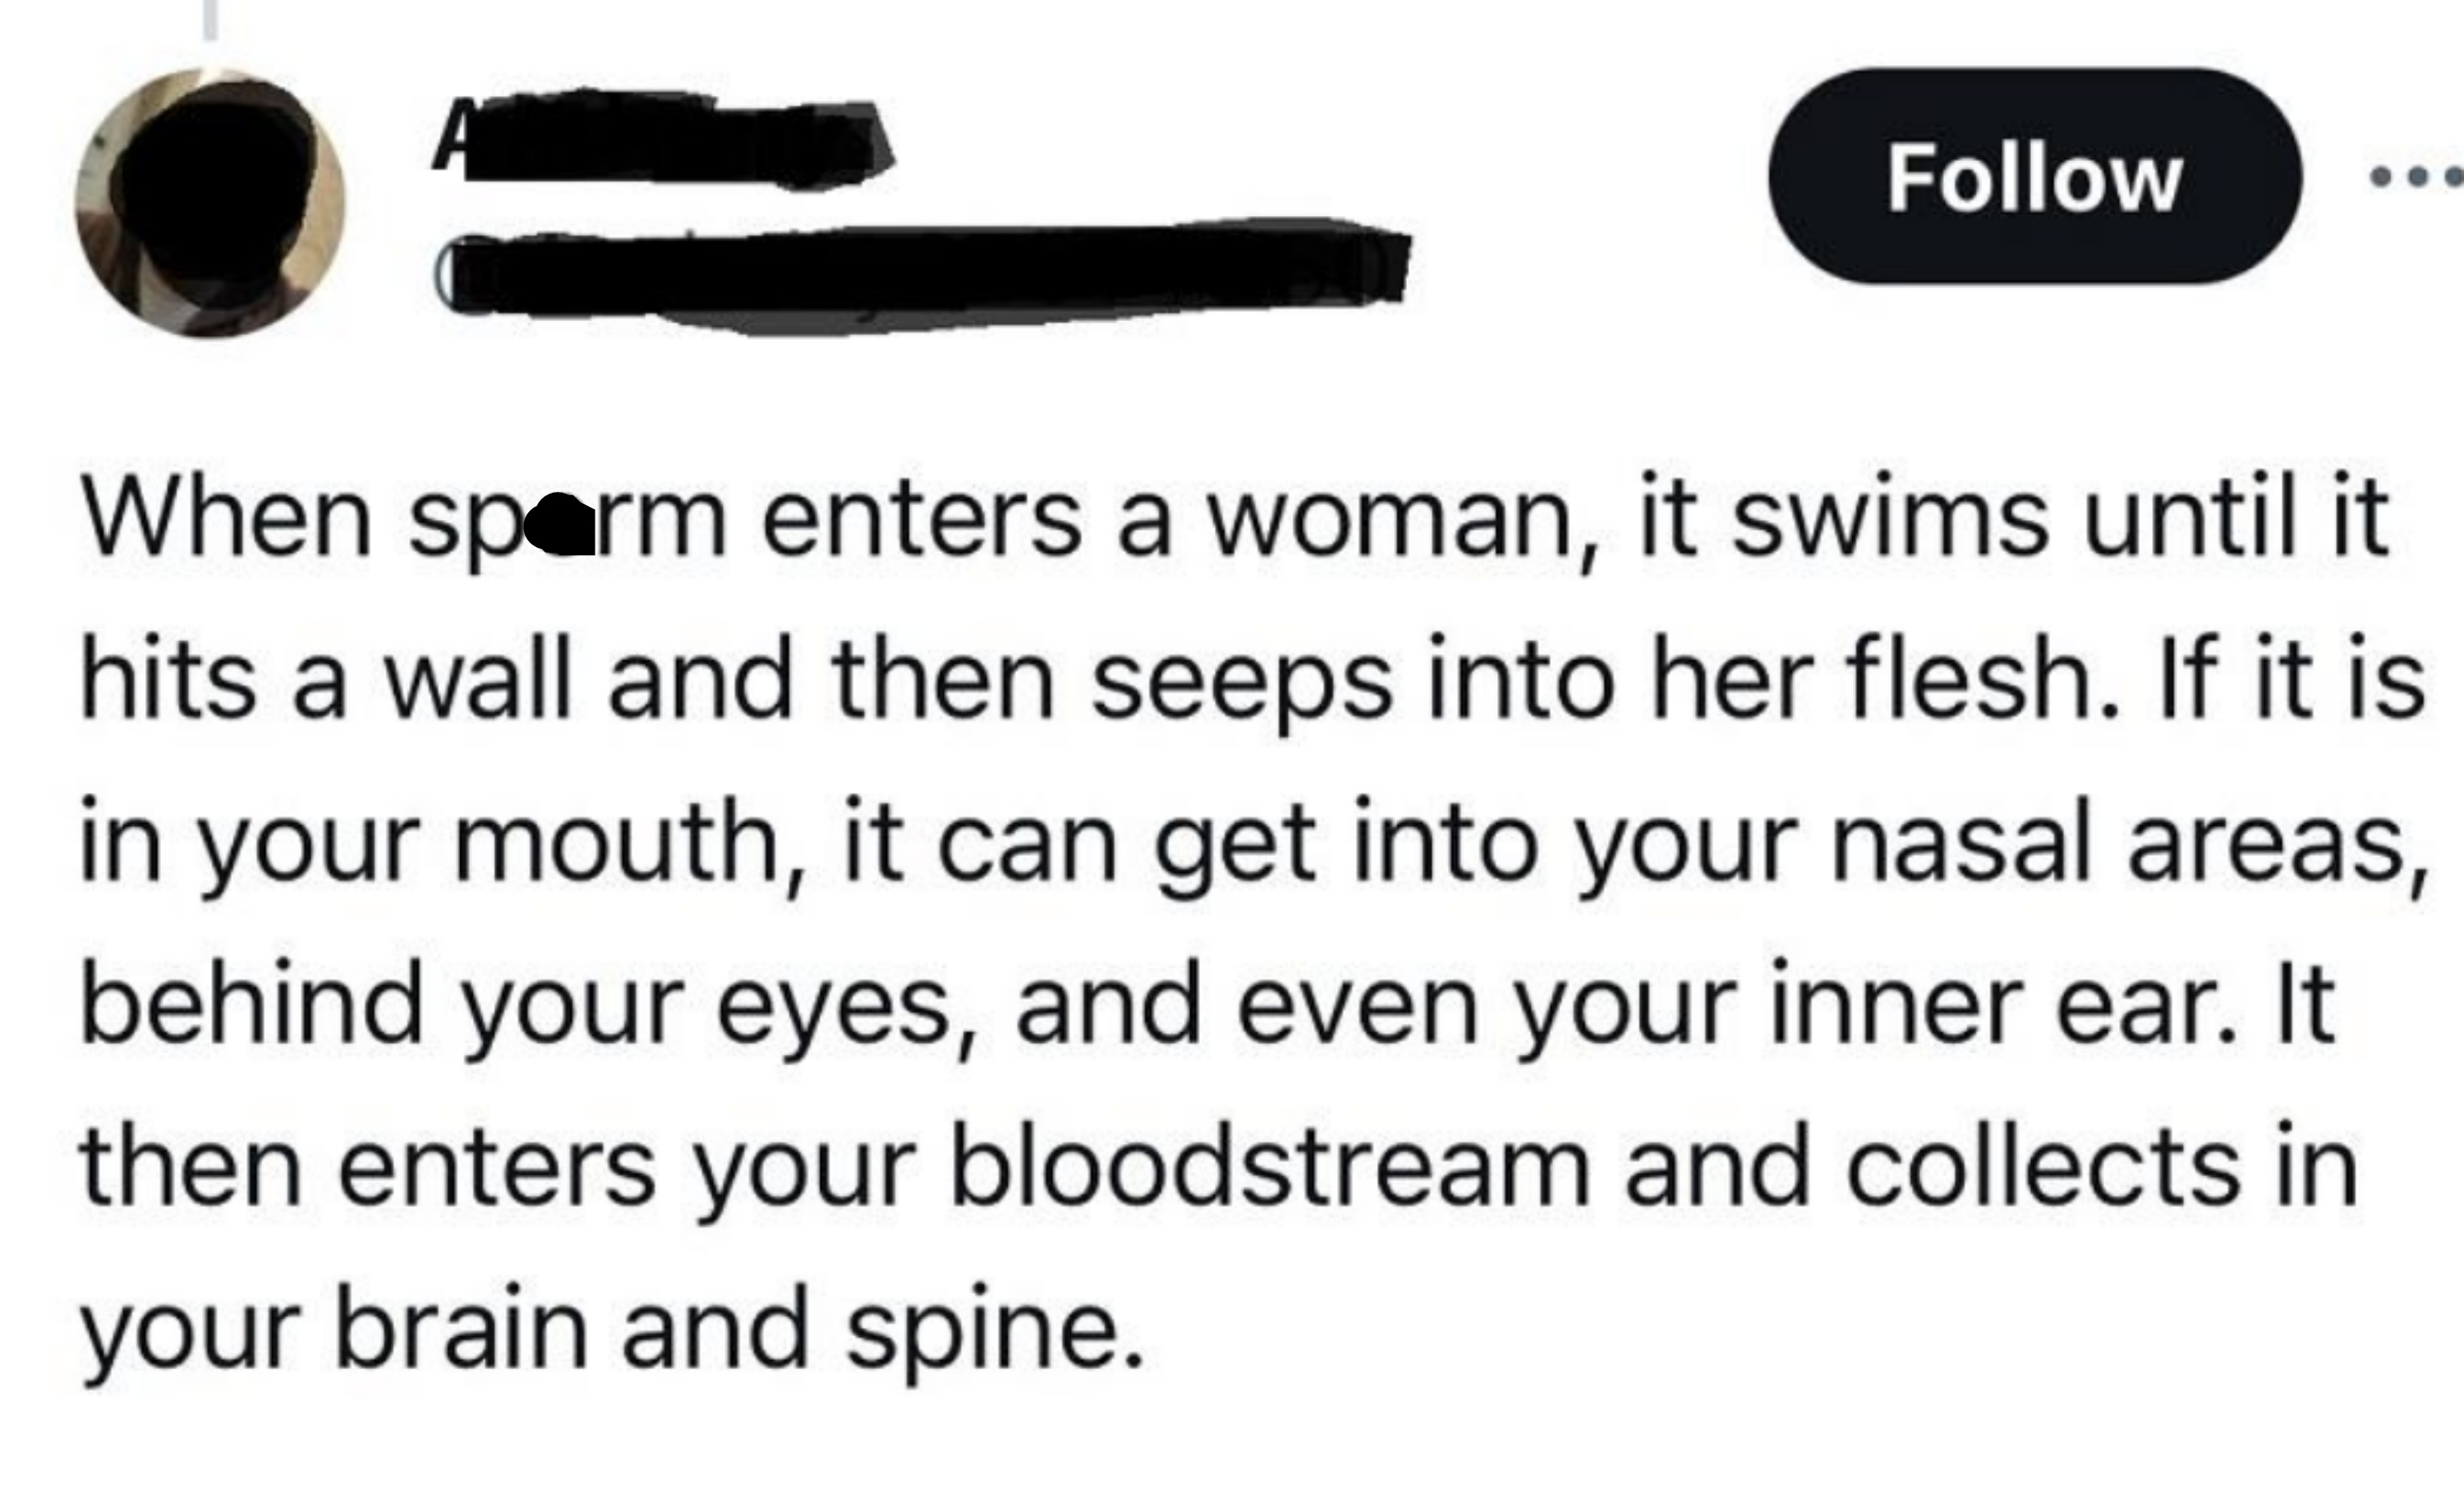 &quot;It then enters your bloodstream and collects in your brain and spine.&quot;